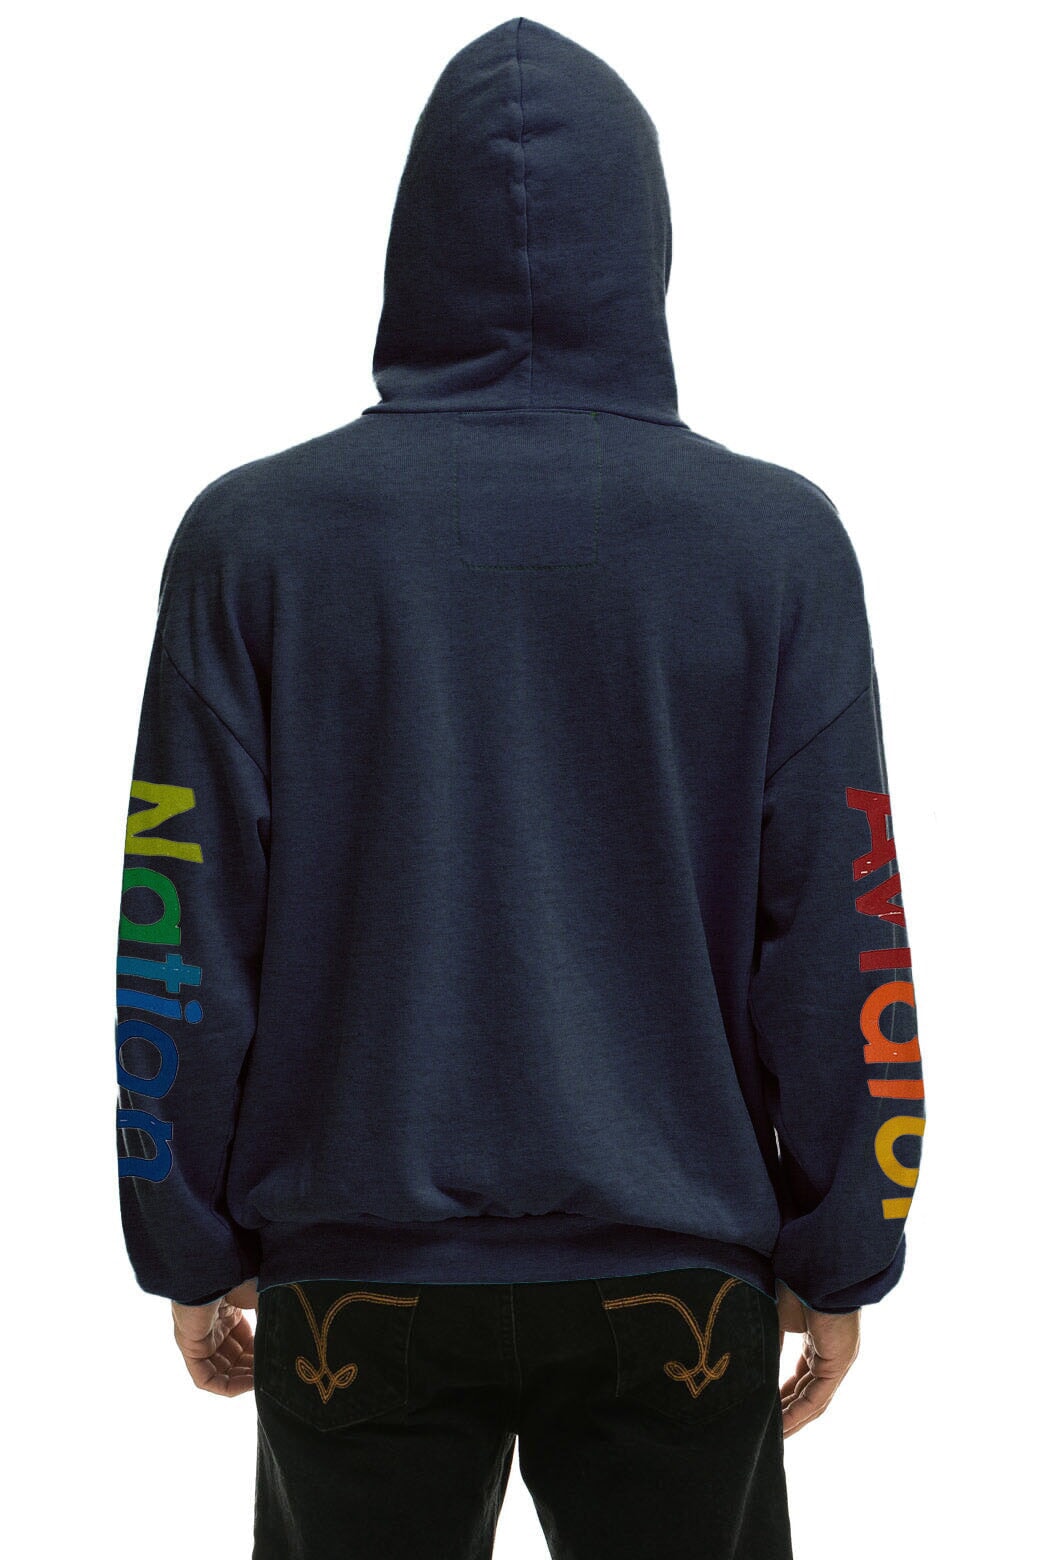 AVIATOR NATION VAIL RELAXED PULLOVER HOODIE - NAVY Hoodie Aviator Nation 